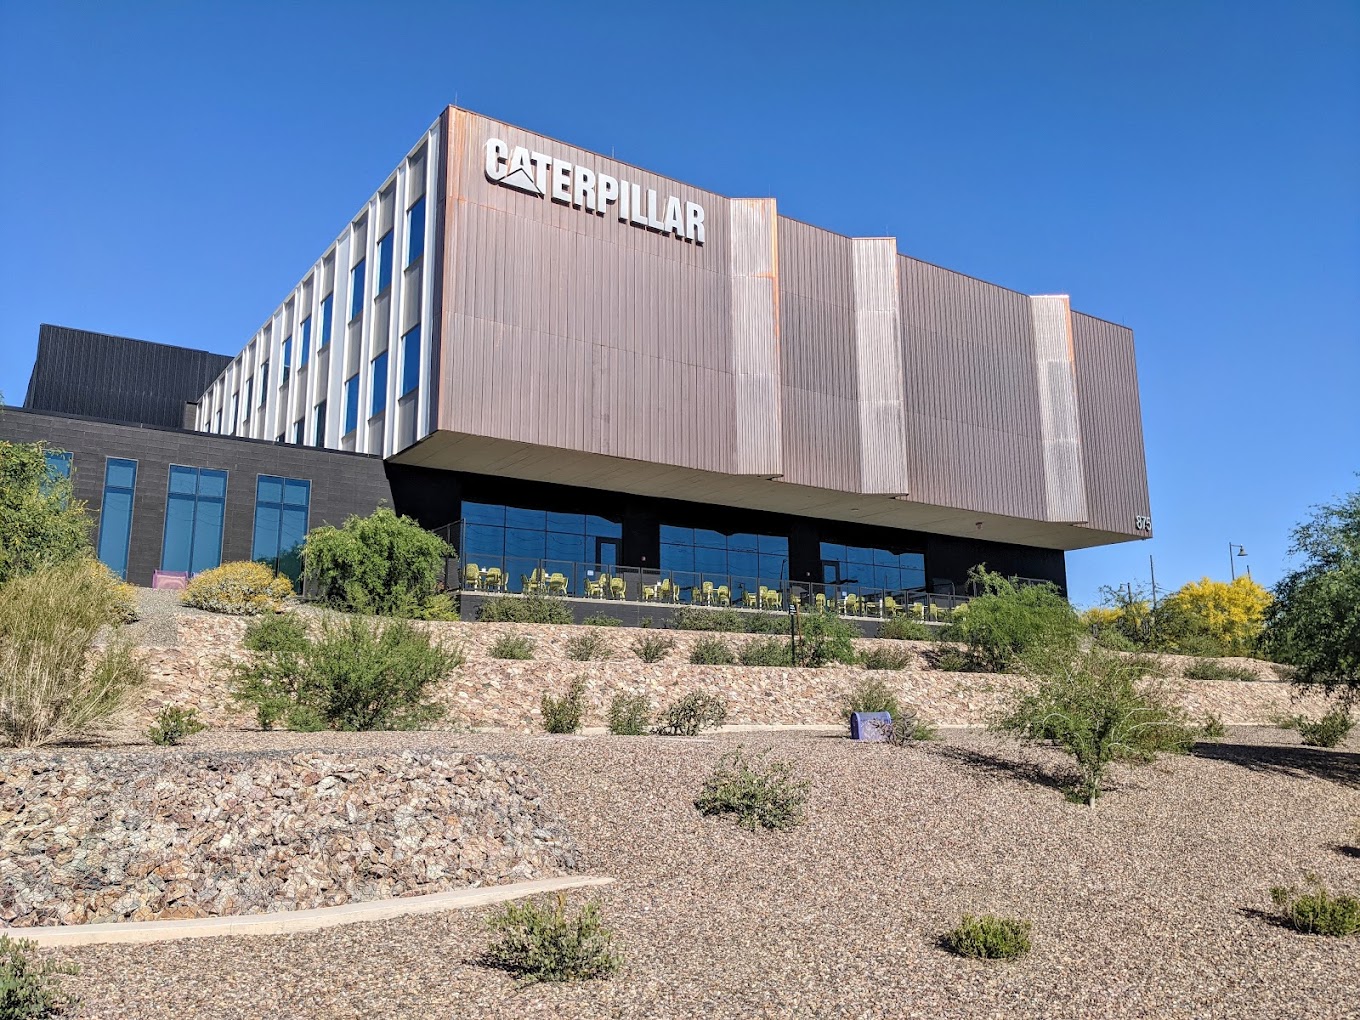 Caterpillar Tucson Regional Offices, is being awarded the 2023 Corporate Volunteerism Award from the Southern Arizona Volunteer Management Association (SAVMA).